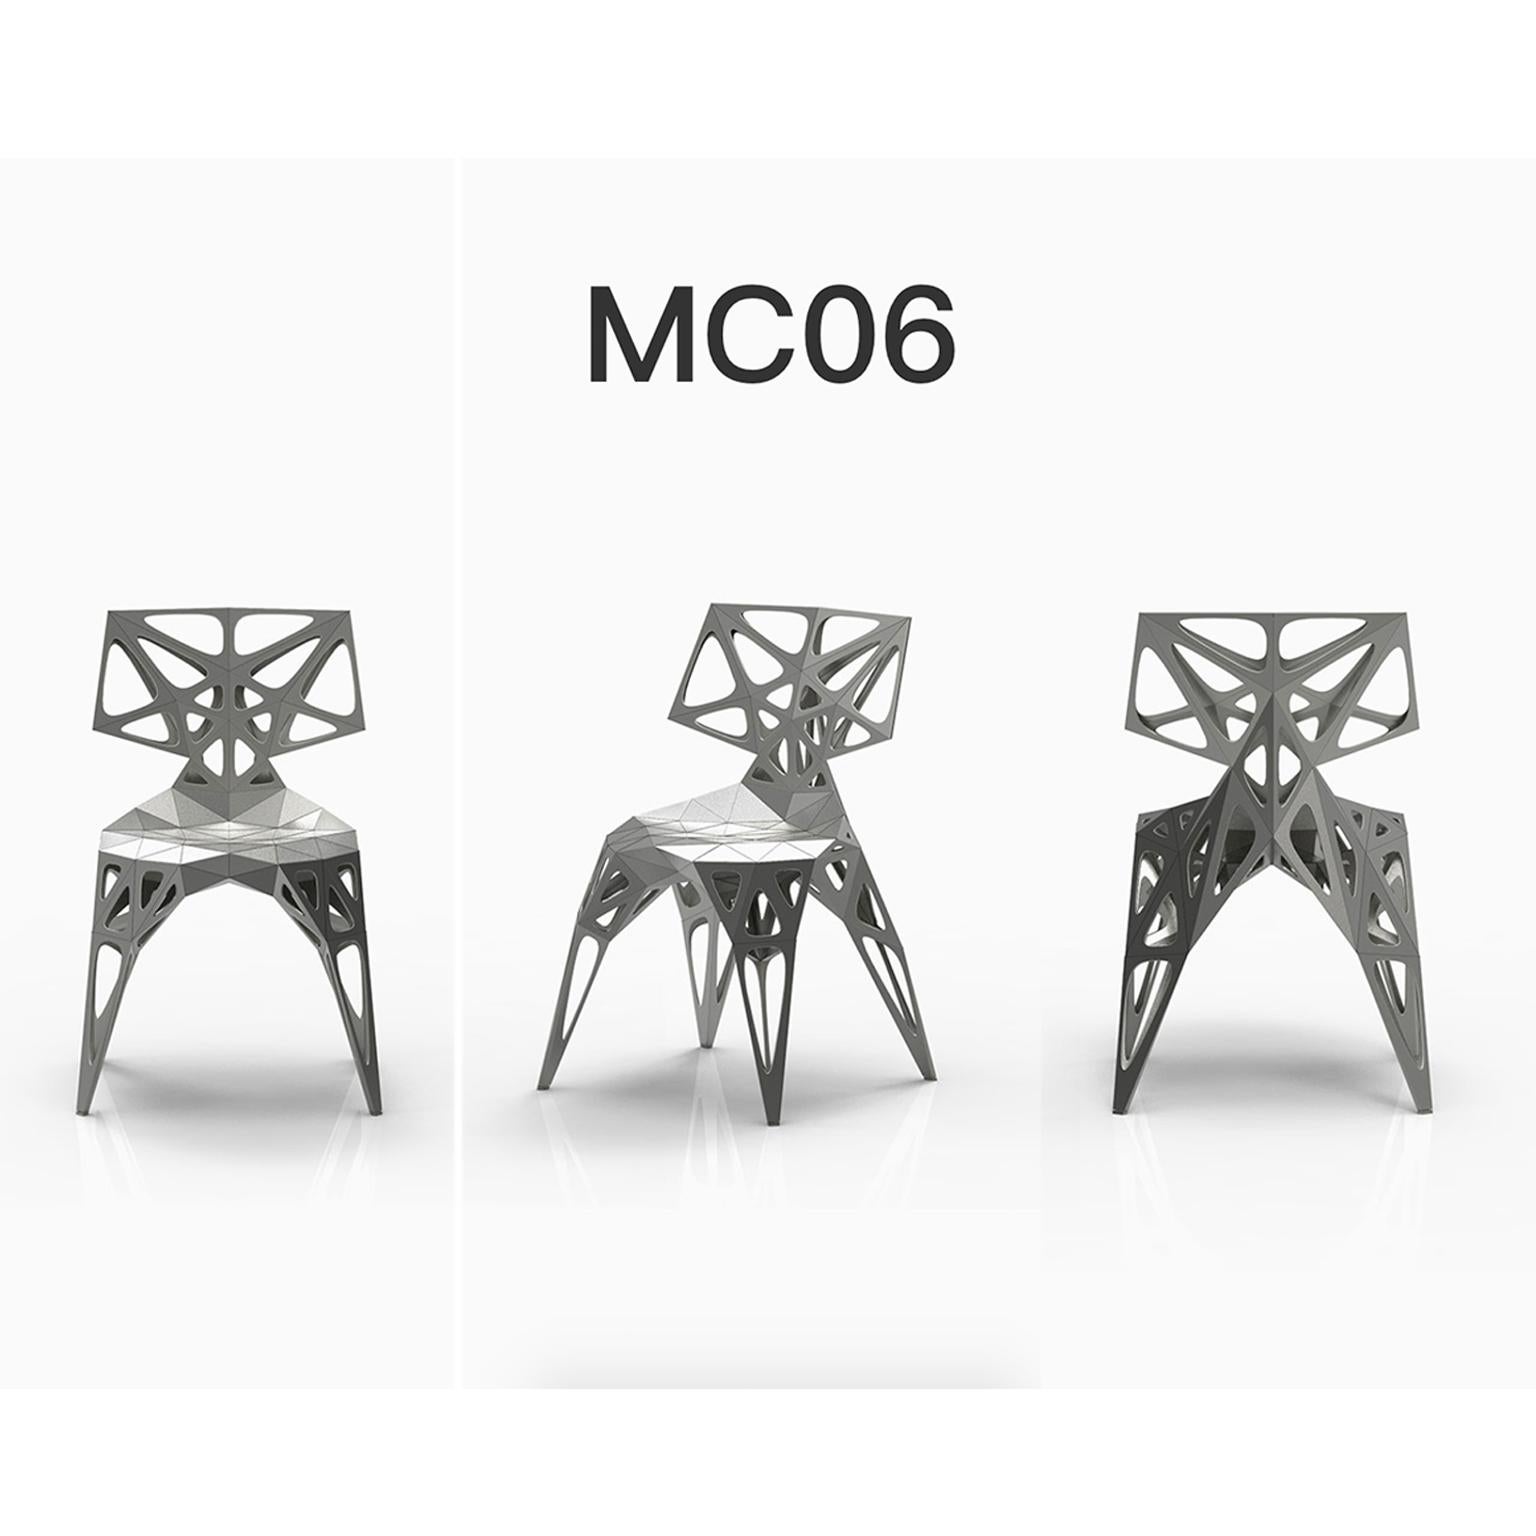 outdoor+indoor
3 official types chairs / available
solid
dots
frame
2 colors official / available / finish in polish/matt
black
silver

Furniture designer Zhoujie Zhang is known for the integration of automated digital design and elements